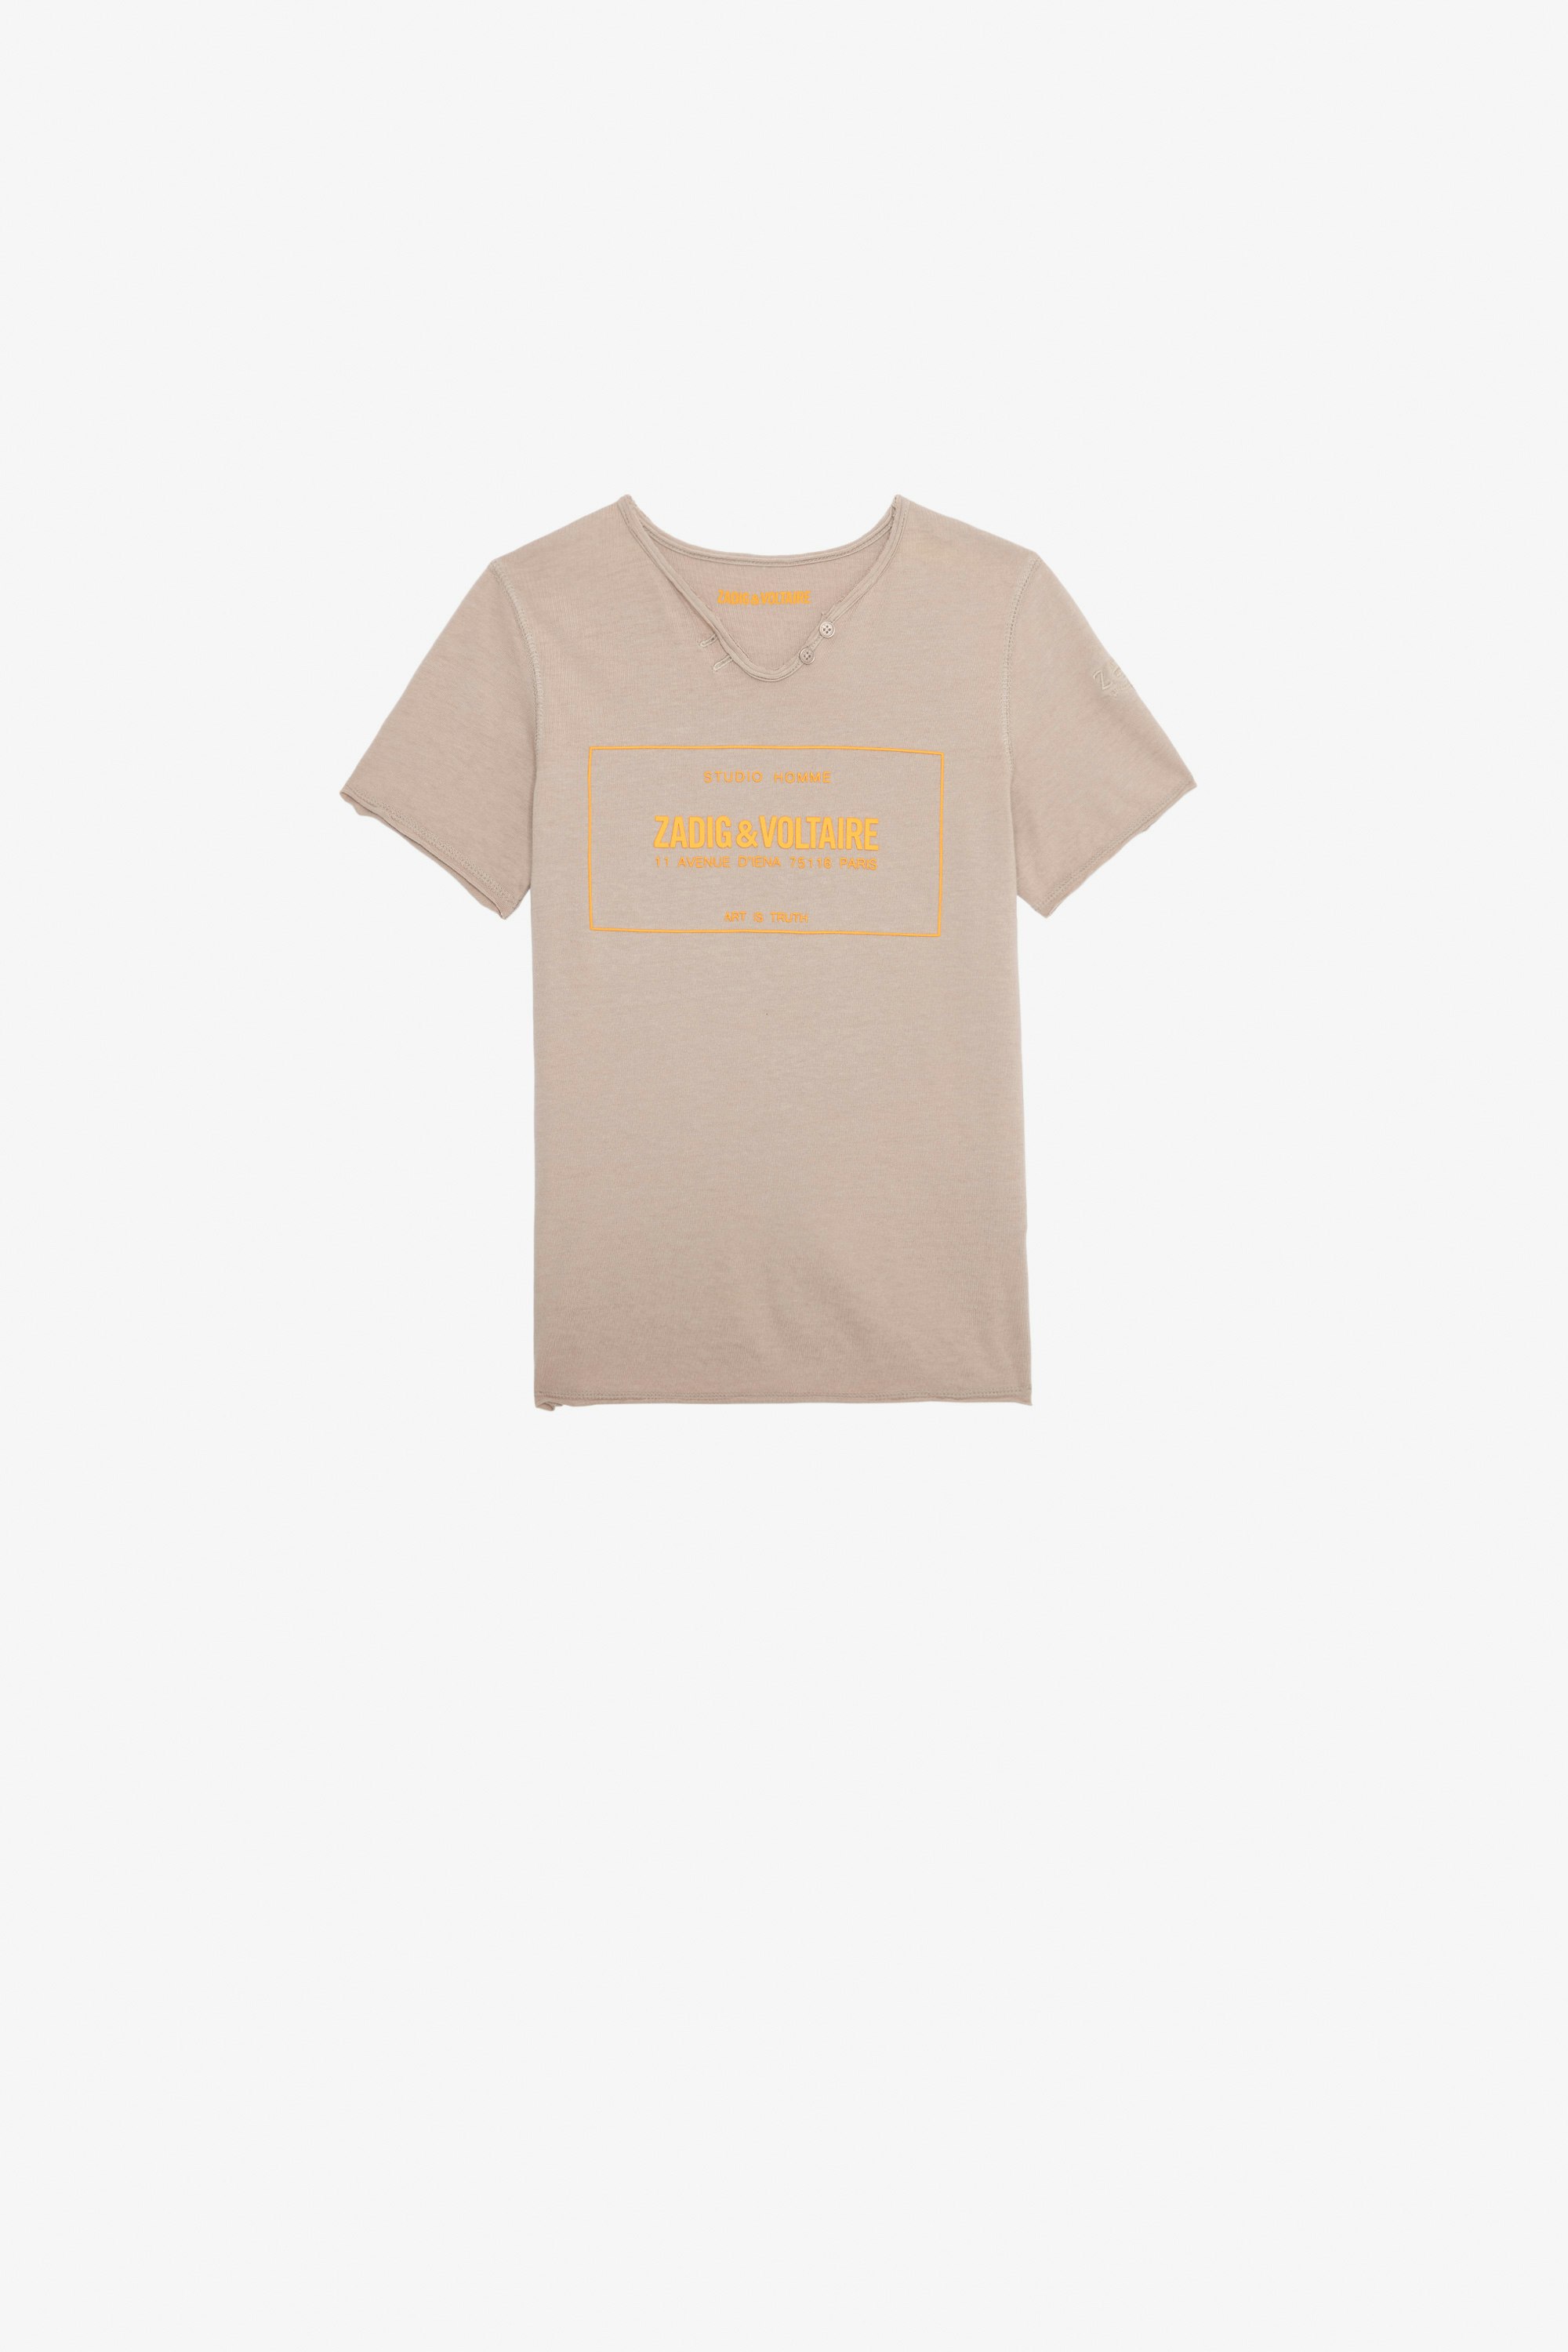 Boxer Boys’ T-Shirt - Boys’ beige short-sleeved cotton jersey T-shirt with studio insignia.